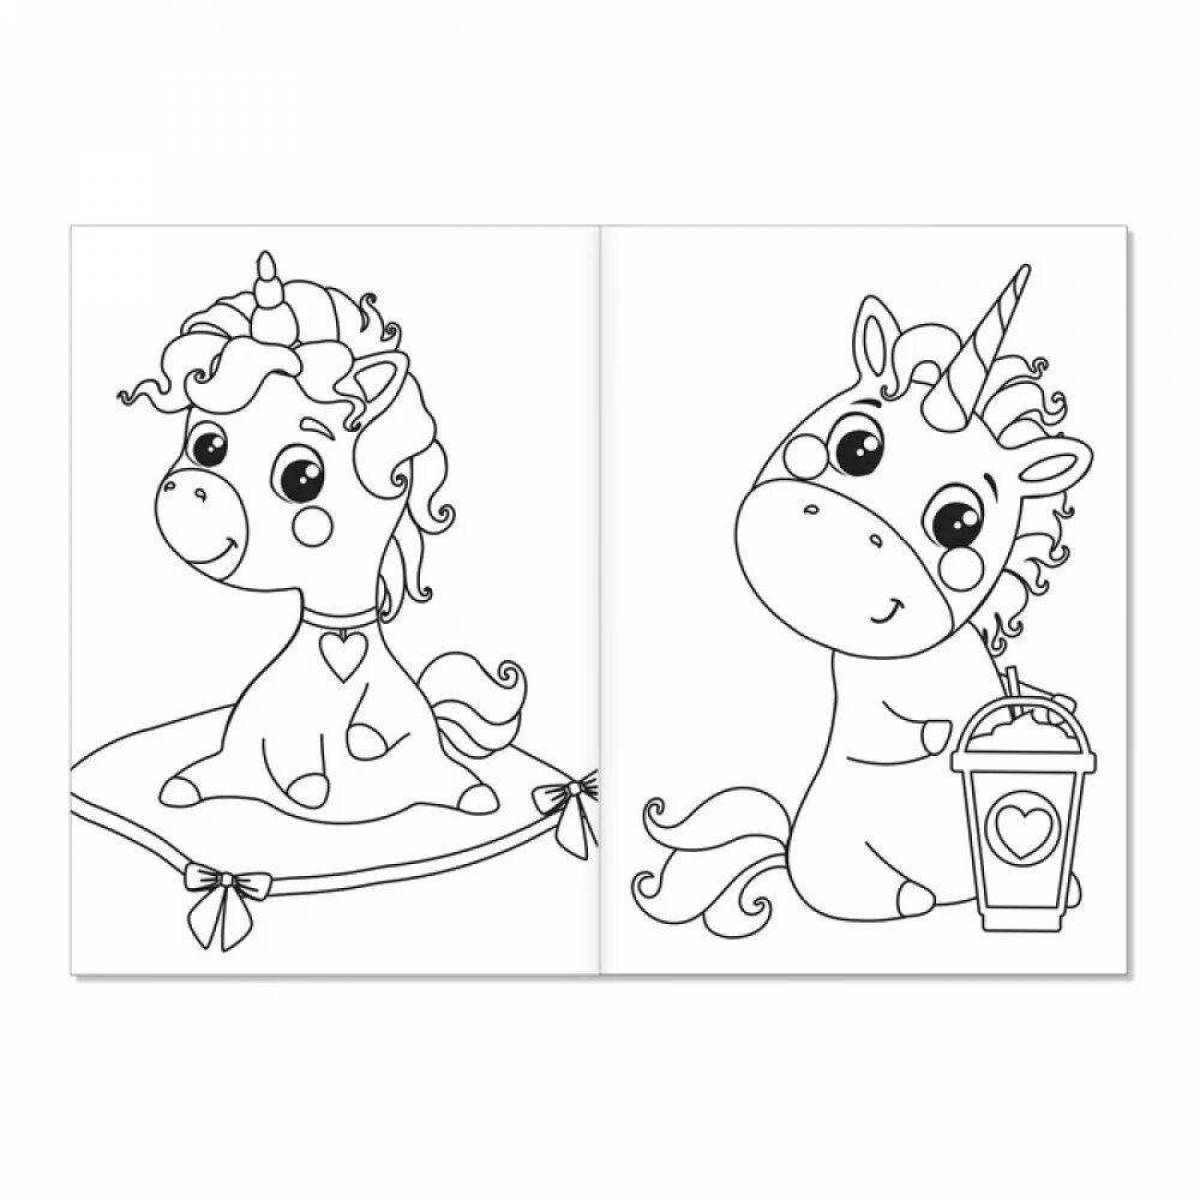 Creative coloring page 2 on 1 sheet for kids